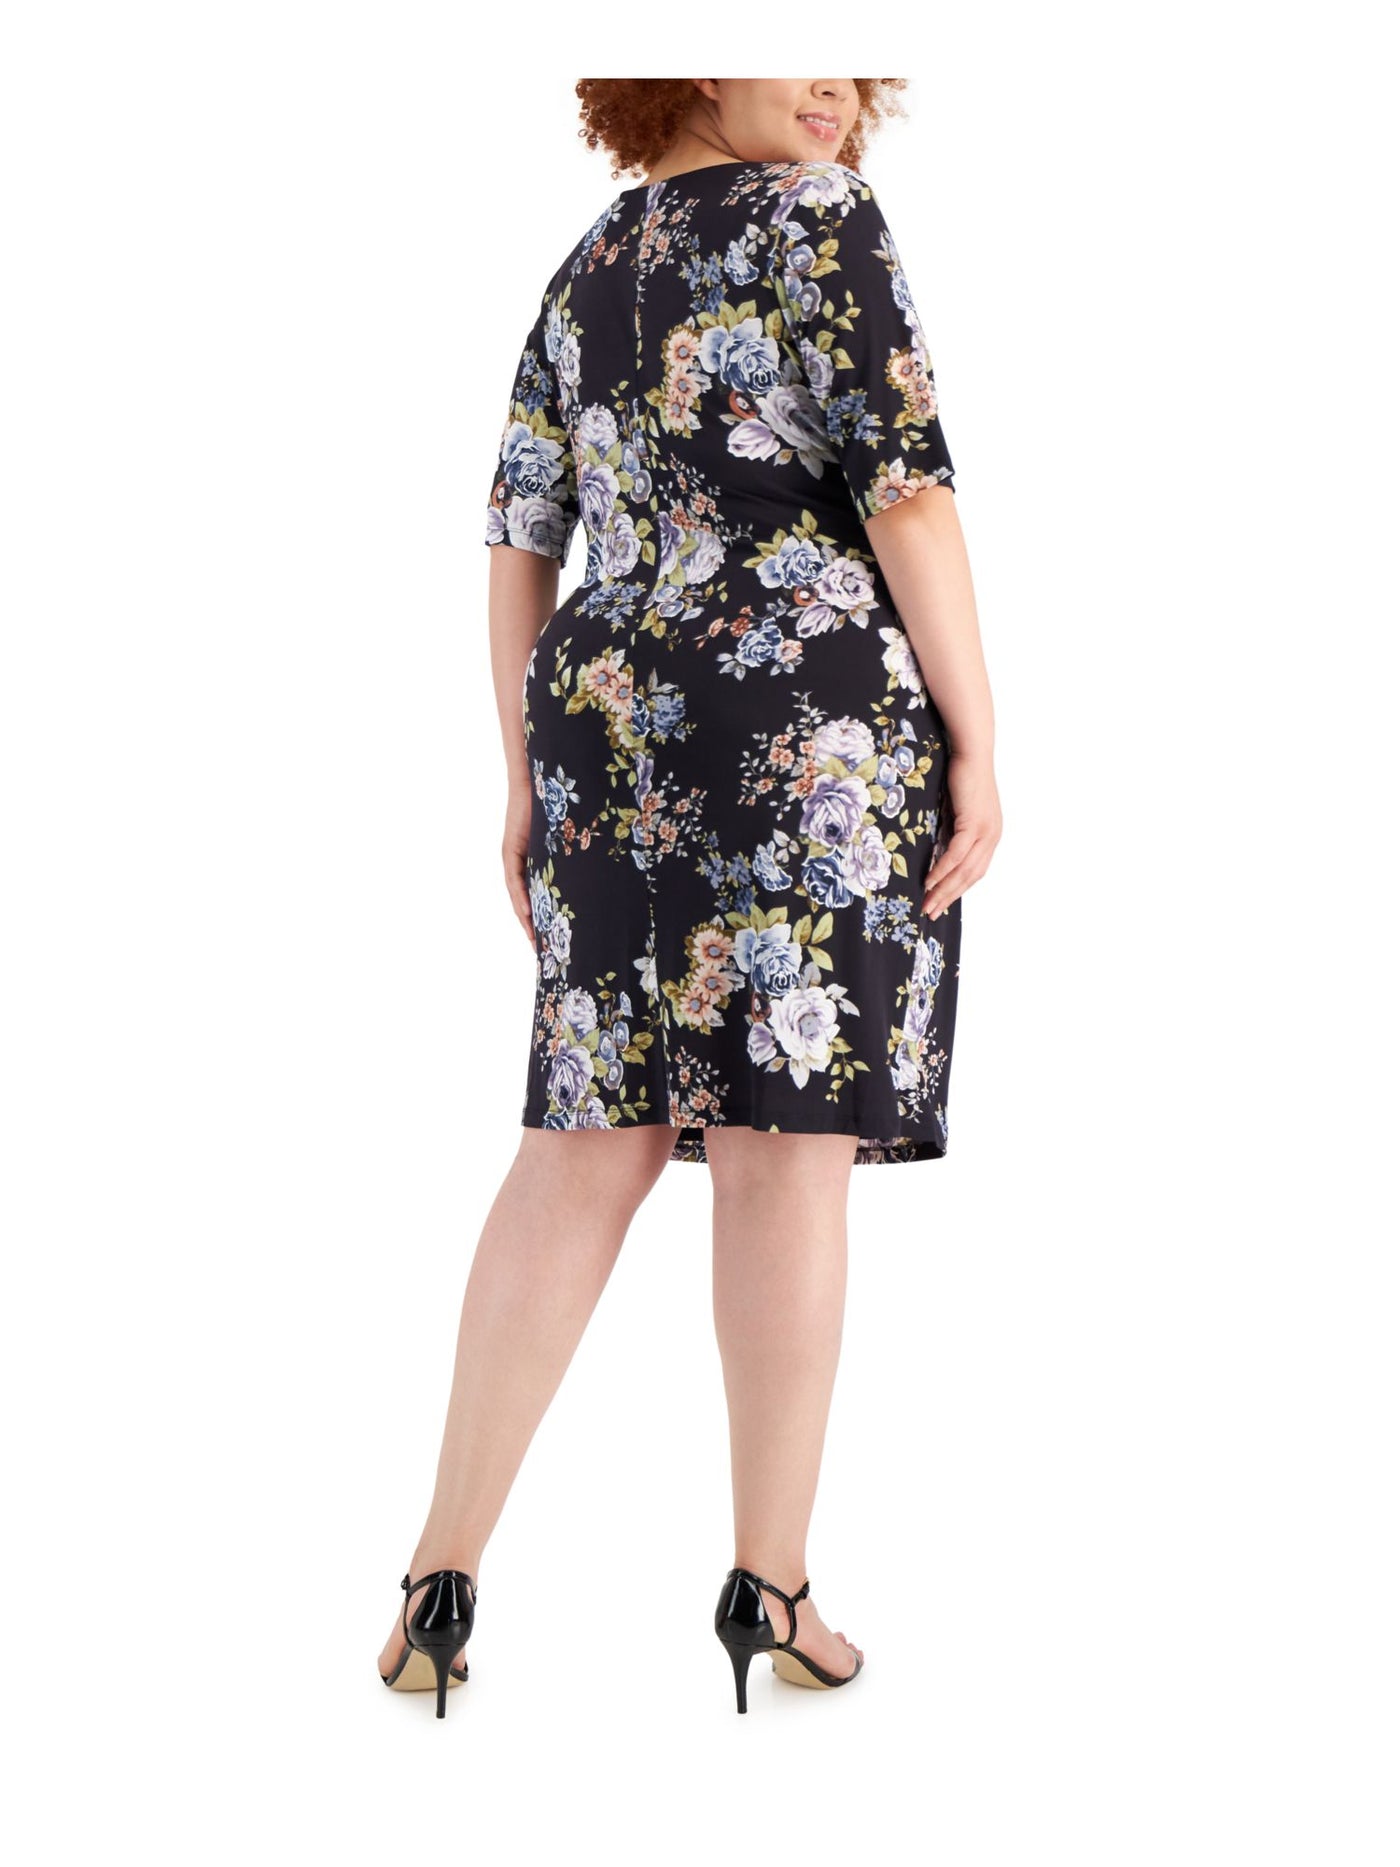 CONNECTED APPAREL Womens Purple Lined Pullover Floral Short Sleeve Round Neck Knee Length Wear To Work Sheath Dress Plus 20W